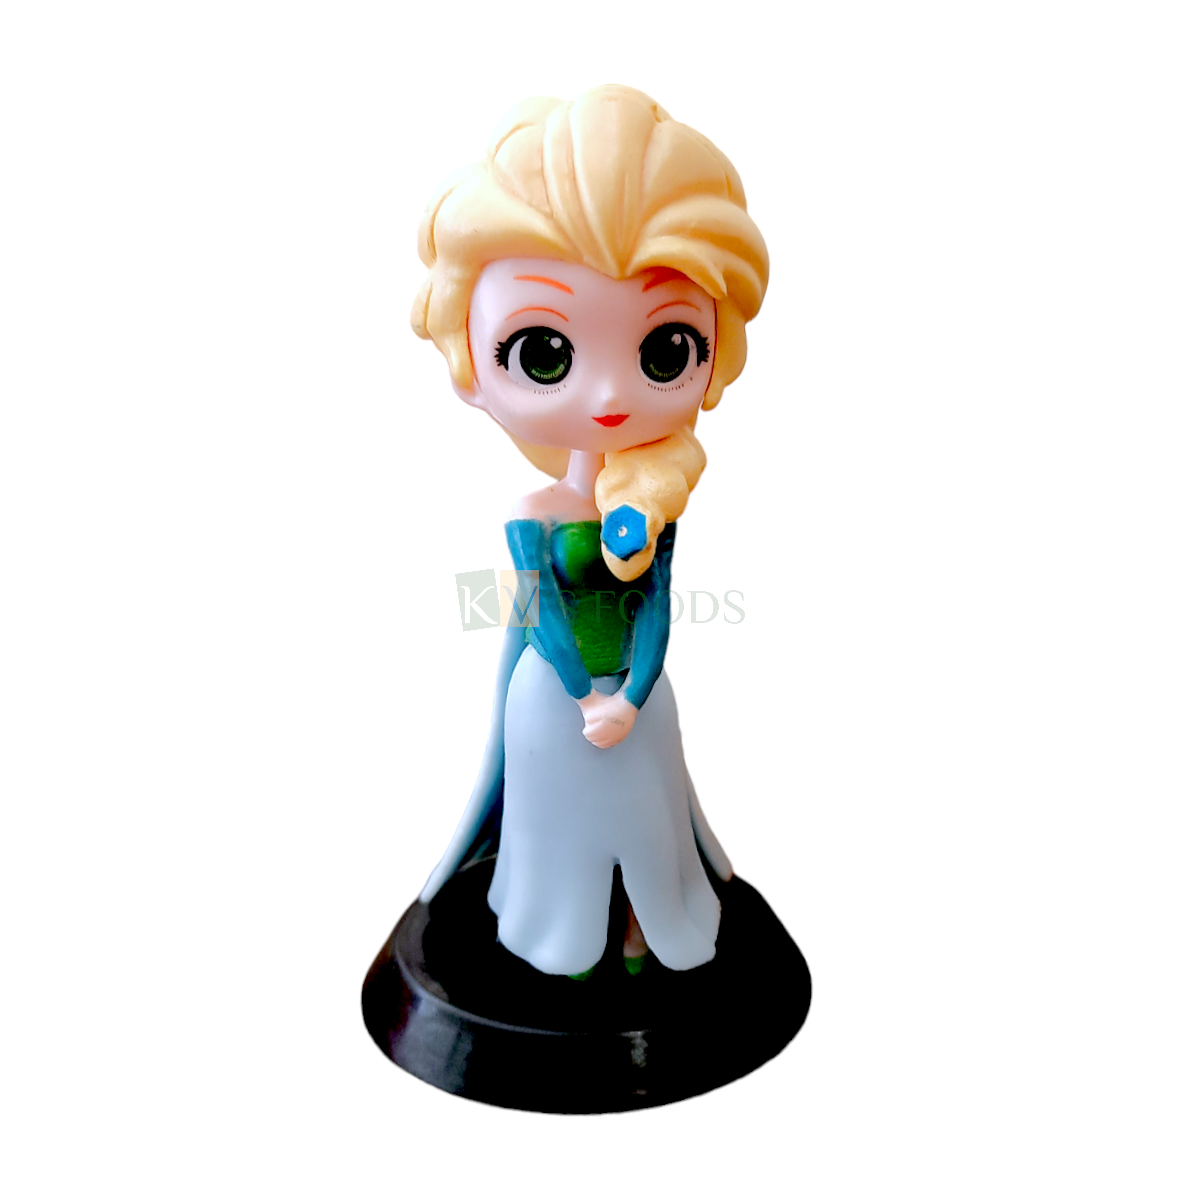 1PC Disney Frozen Queen Elsa Princess Anna With Over Coat Kawaii Q Style Doll Cake Topper, Girls Happy Birthday Theme Big Eyes Doll with Black Base Cutest Princess Figurine DIY Cake Decoration